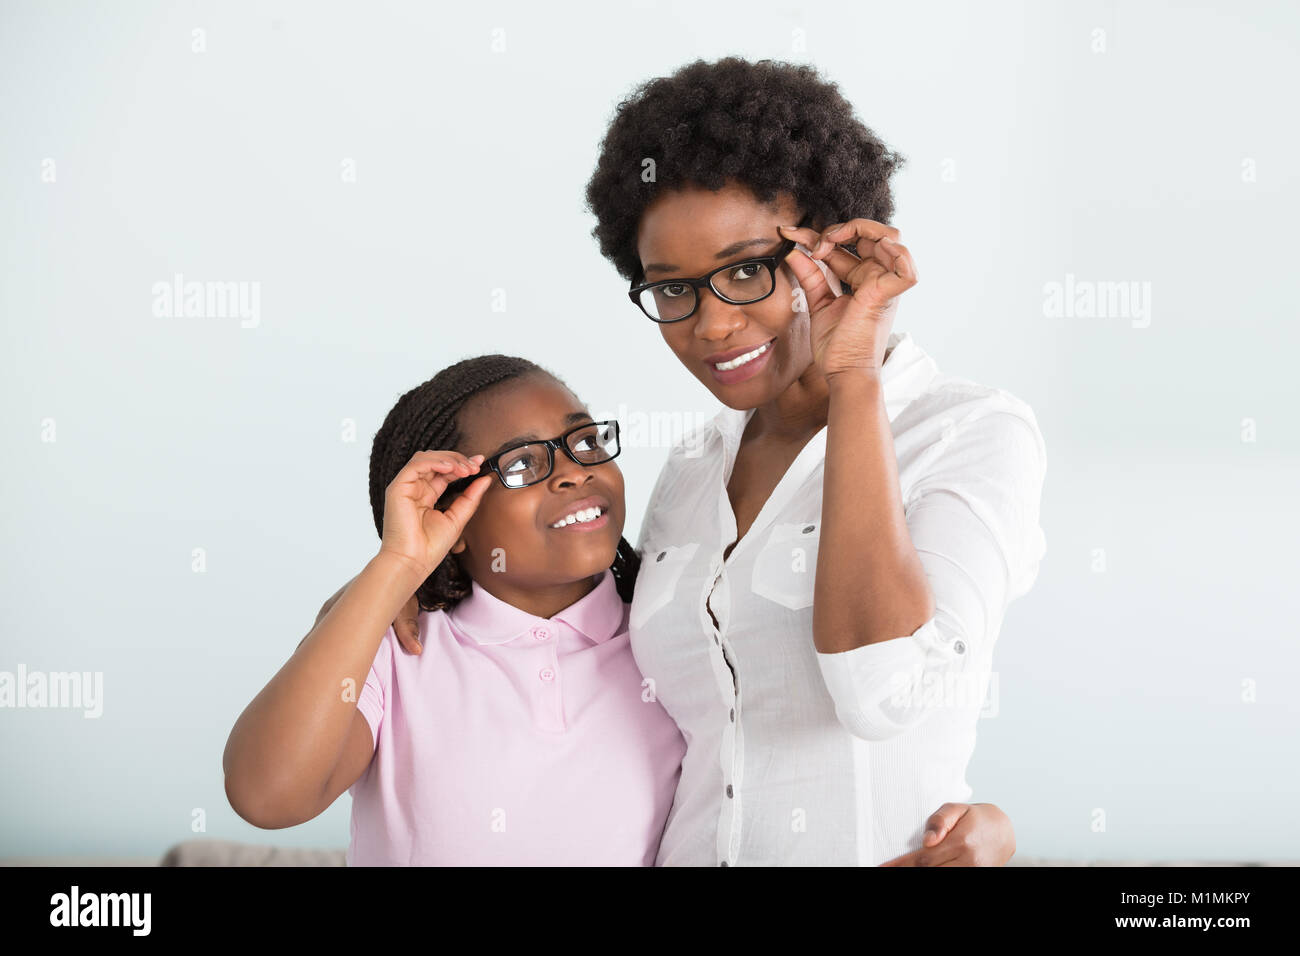 Portrait Of A Smiling Daughter And Mother With Eyeglasses Against White Background Stock Photo